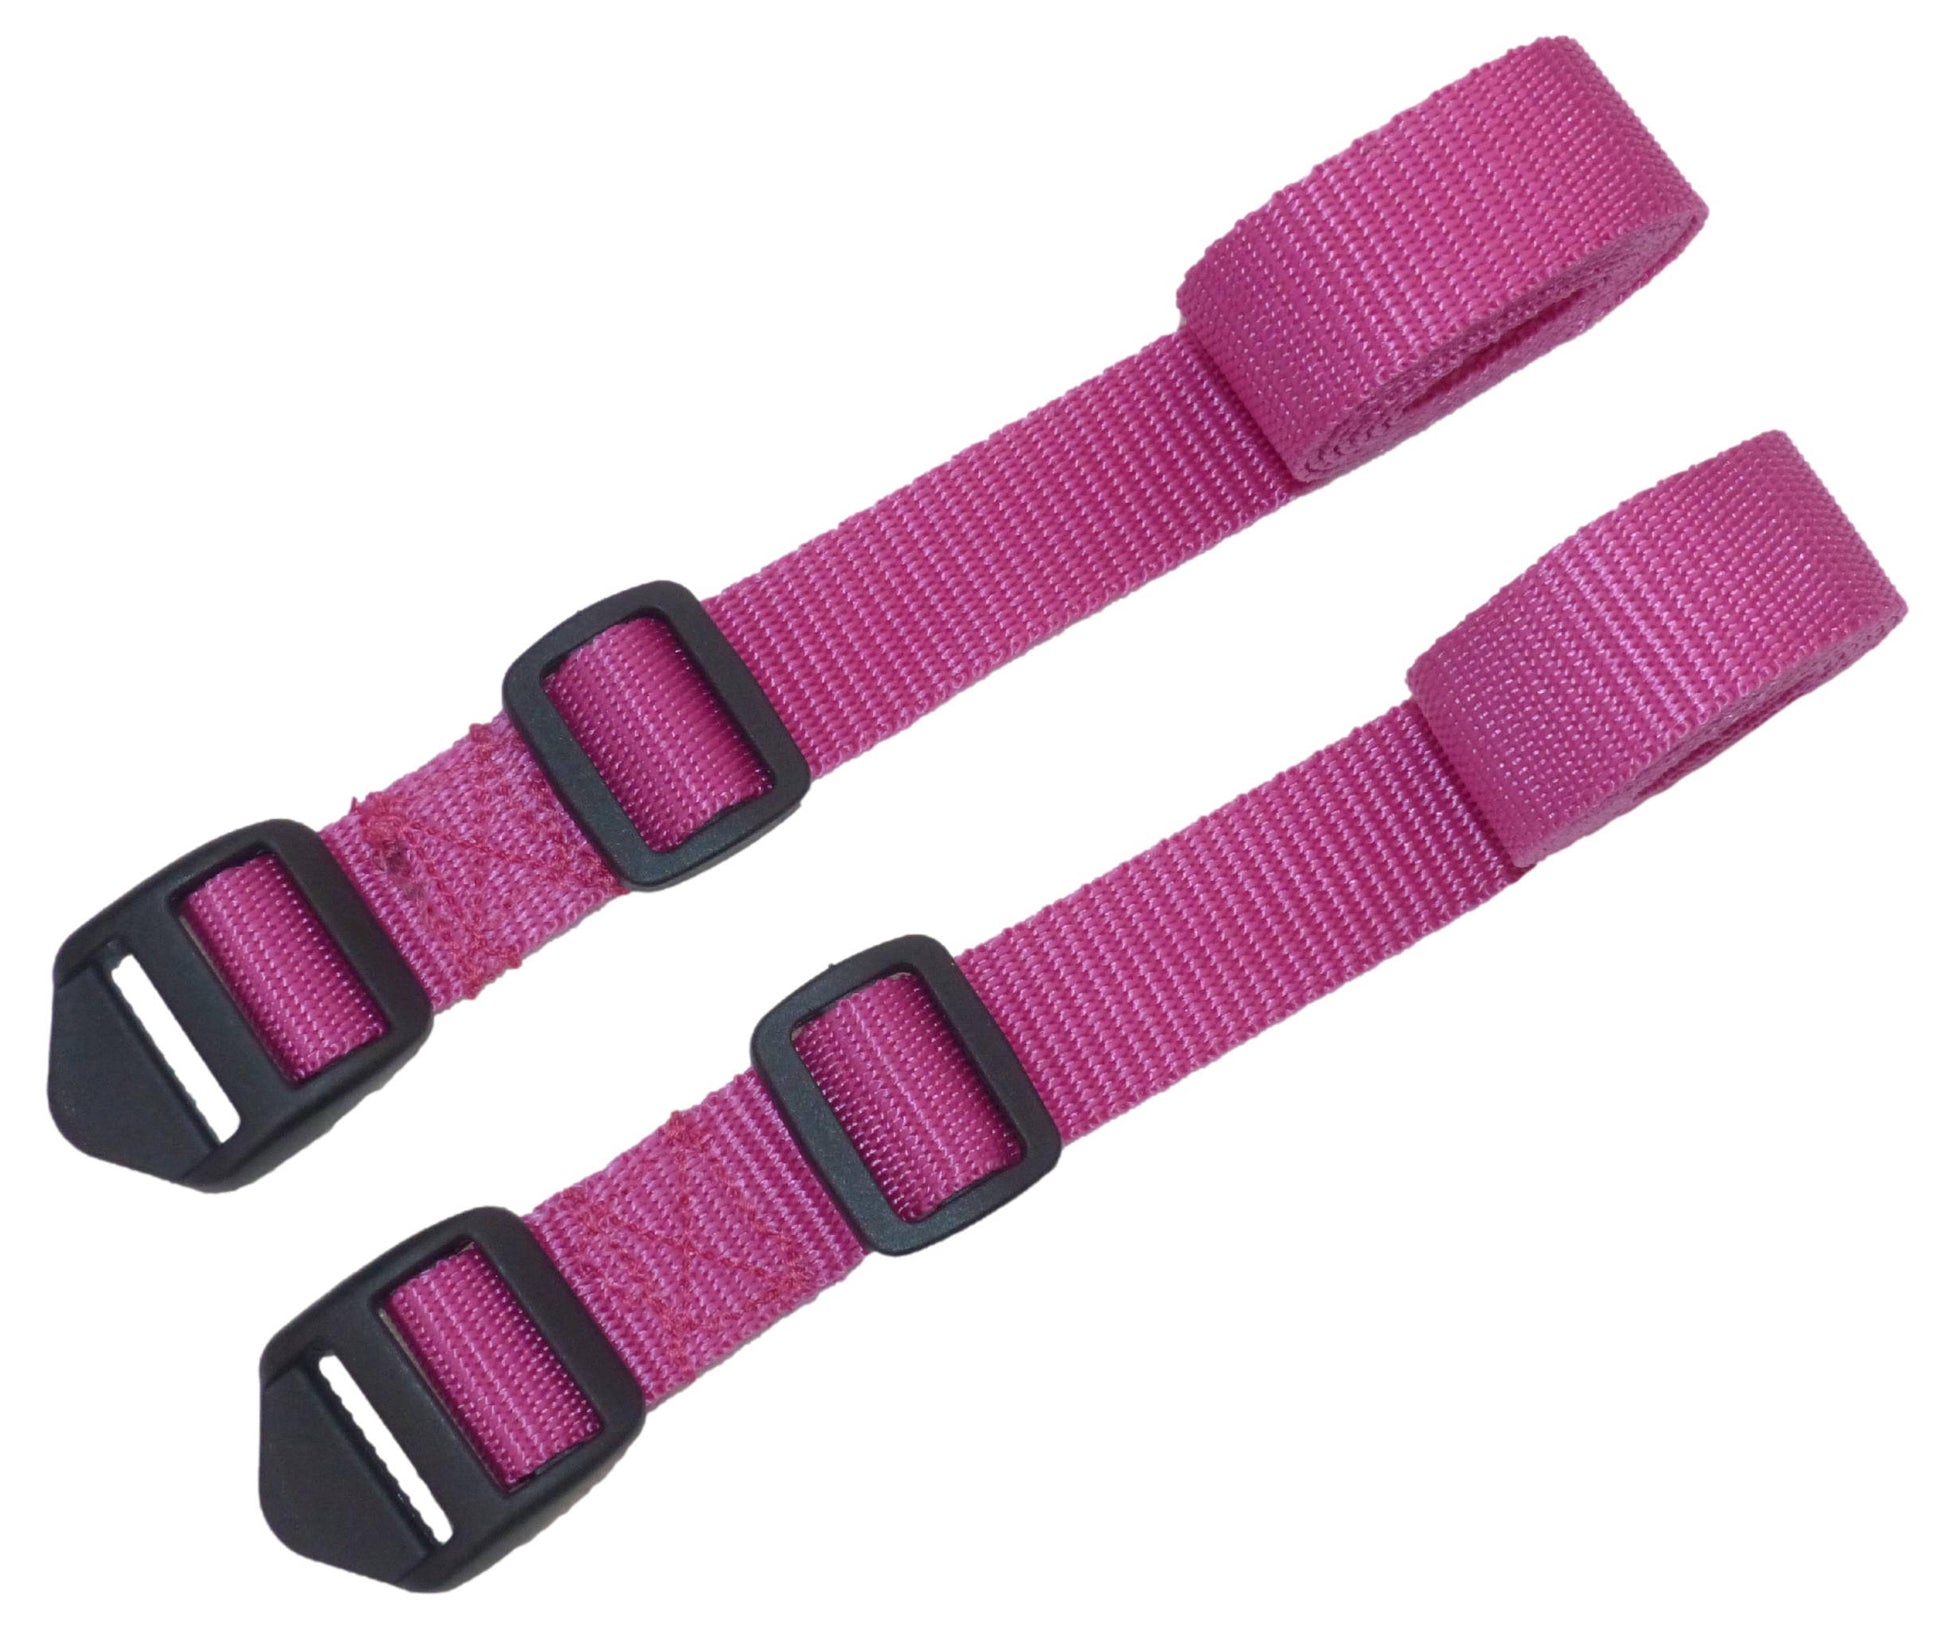 Benristraps 25mm Webbing Strap with Ladderloc Buckle (Pair) in pink